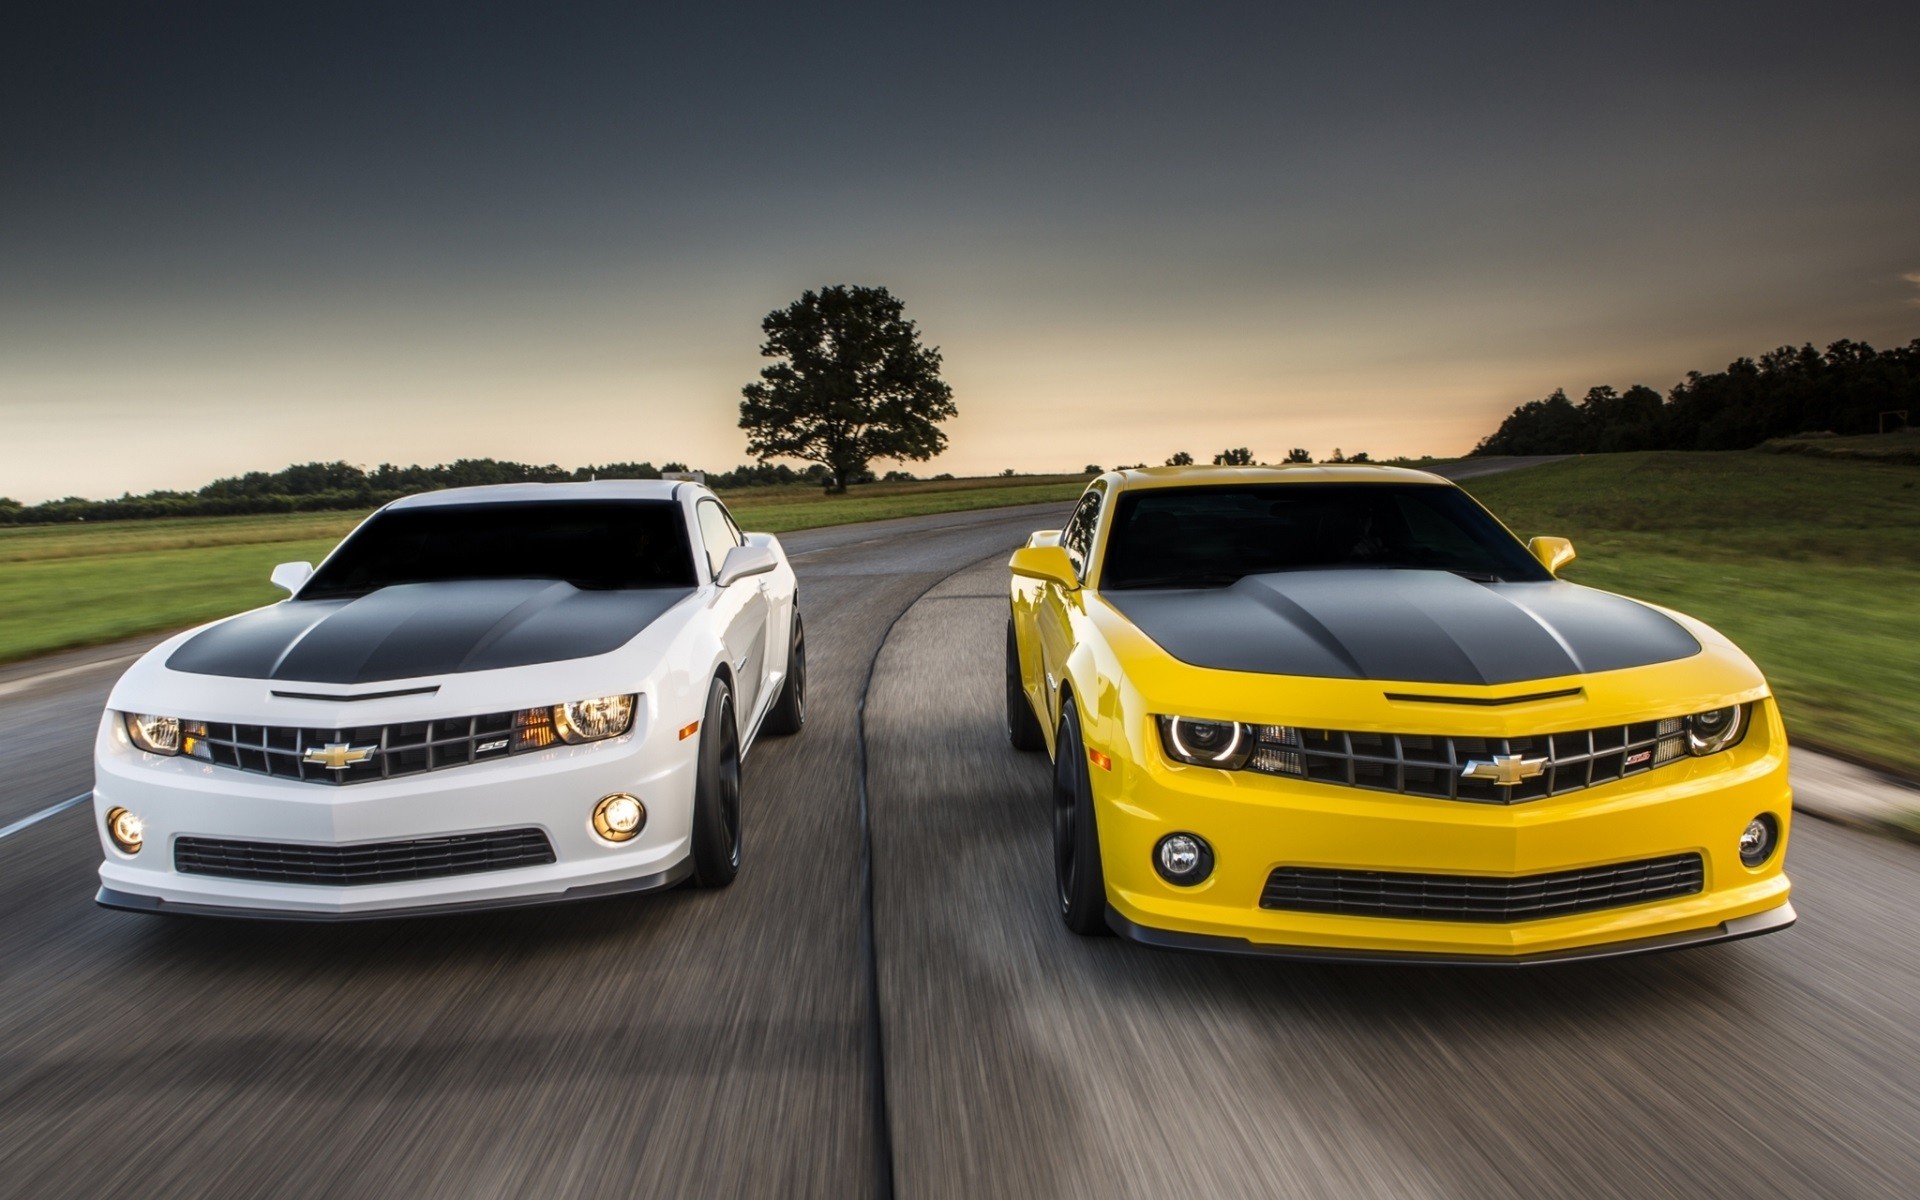 General 1920x1200 Chevrolet Camaro Chevrolet white cars yellow cars car vehicle muscle cars American cars